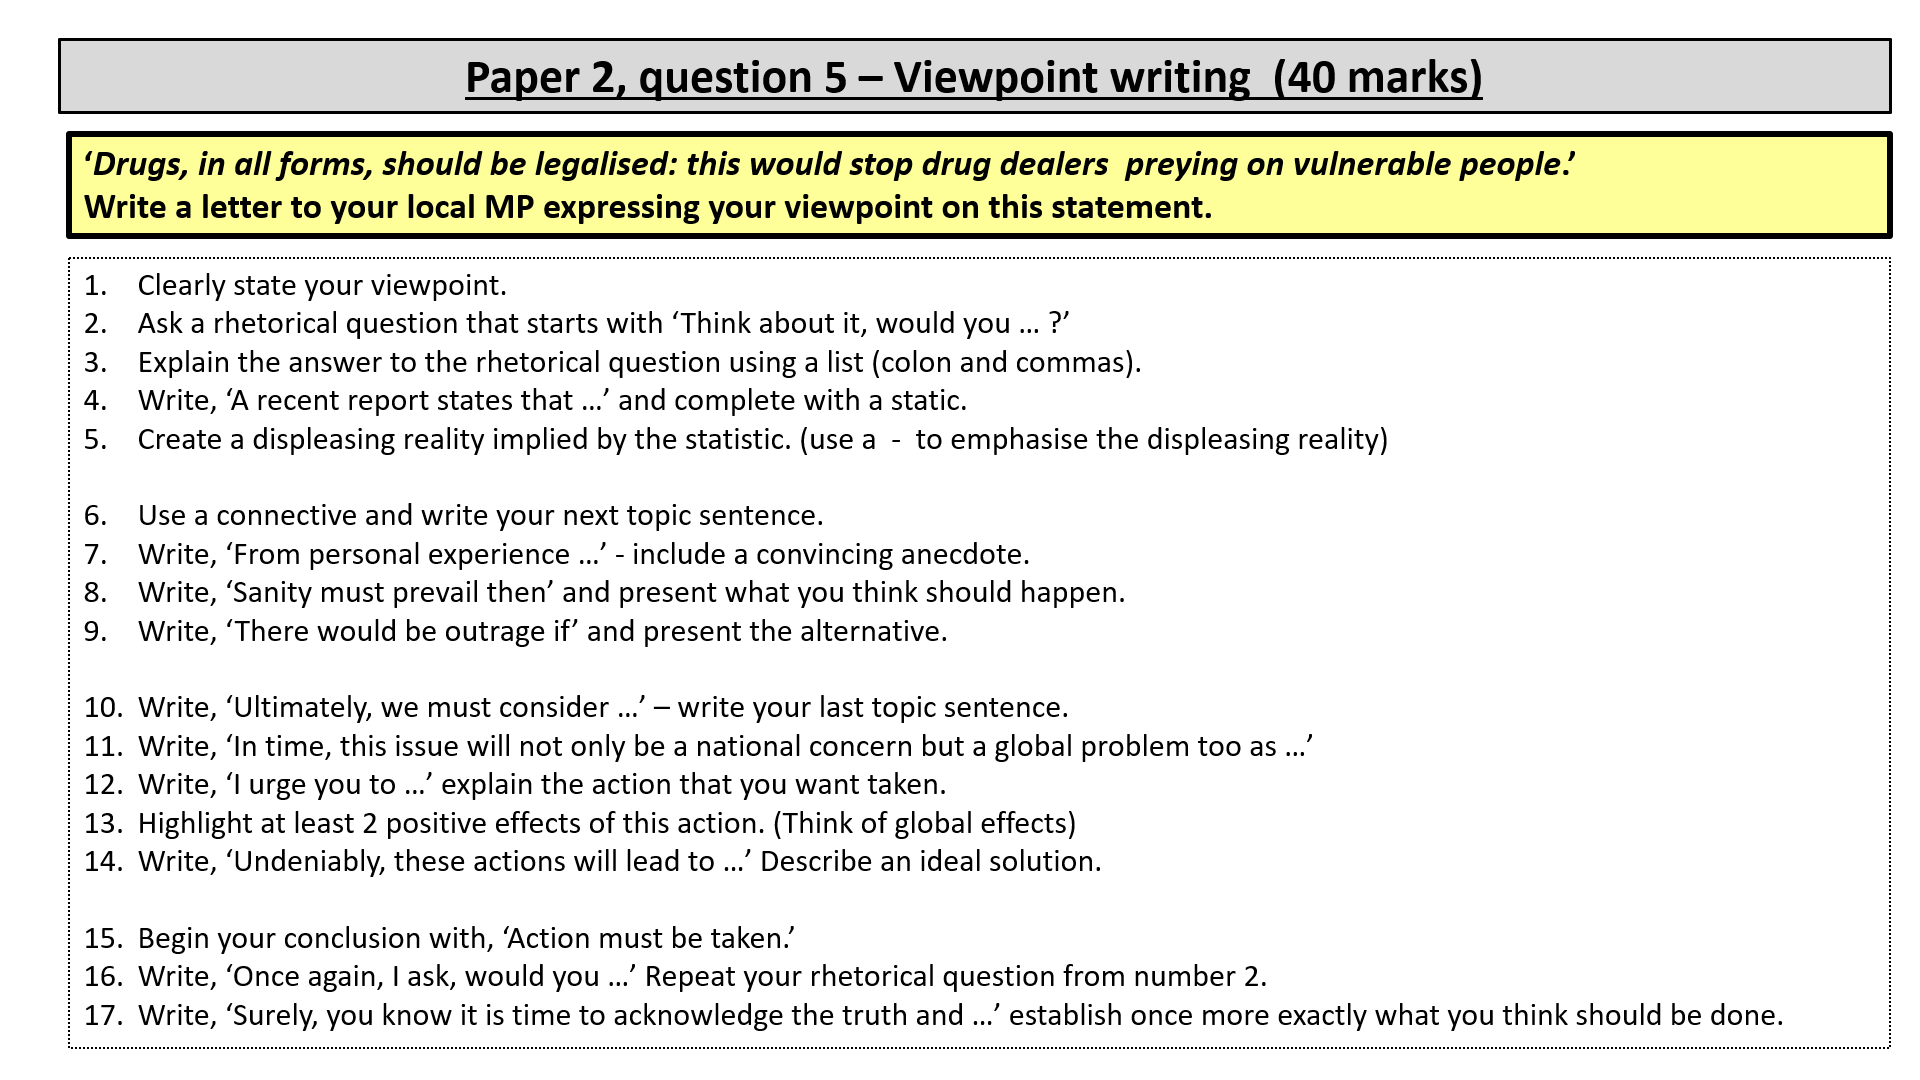 Why I Love Aqa Paper 2 Question 5 Slow Writing A Process And Approach To Viewpoint Writing Susansenglish